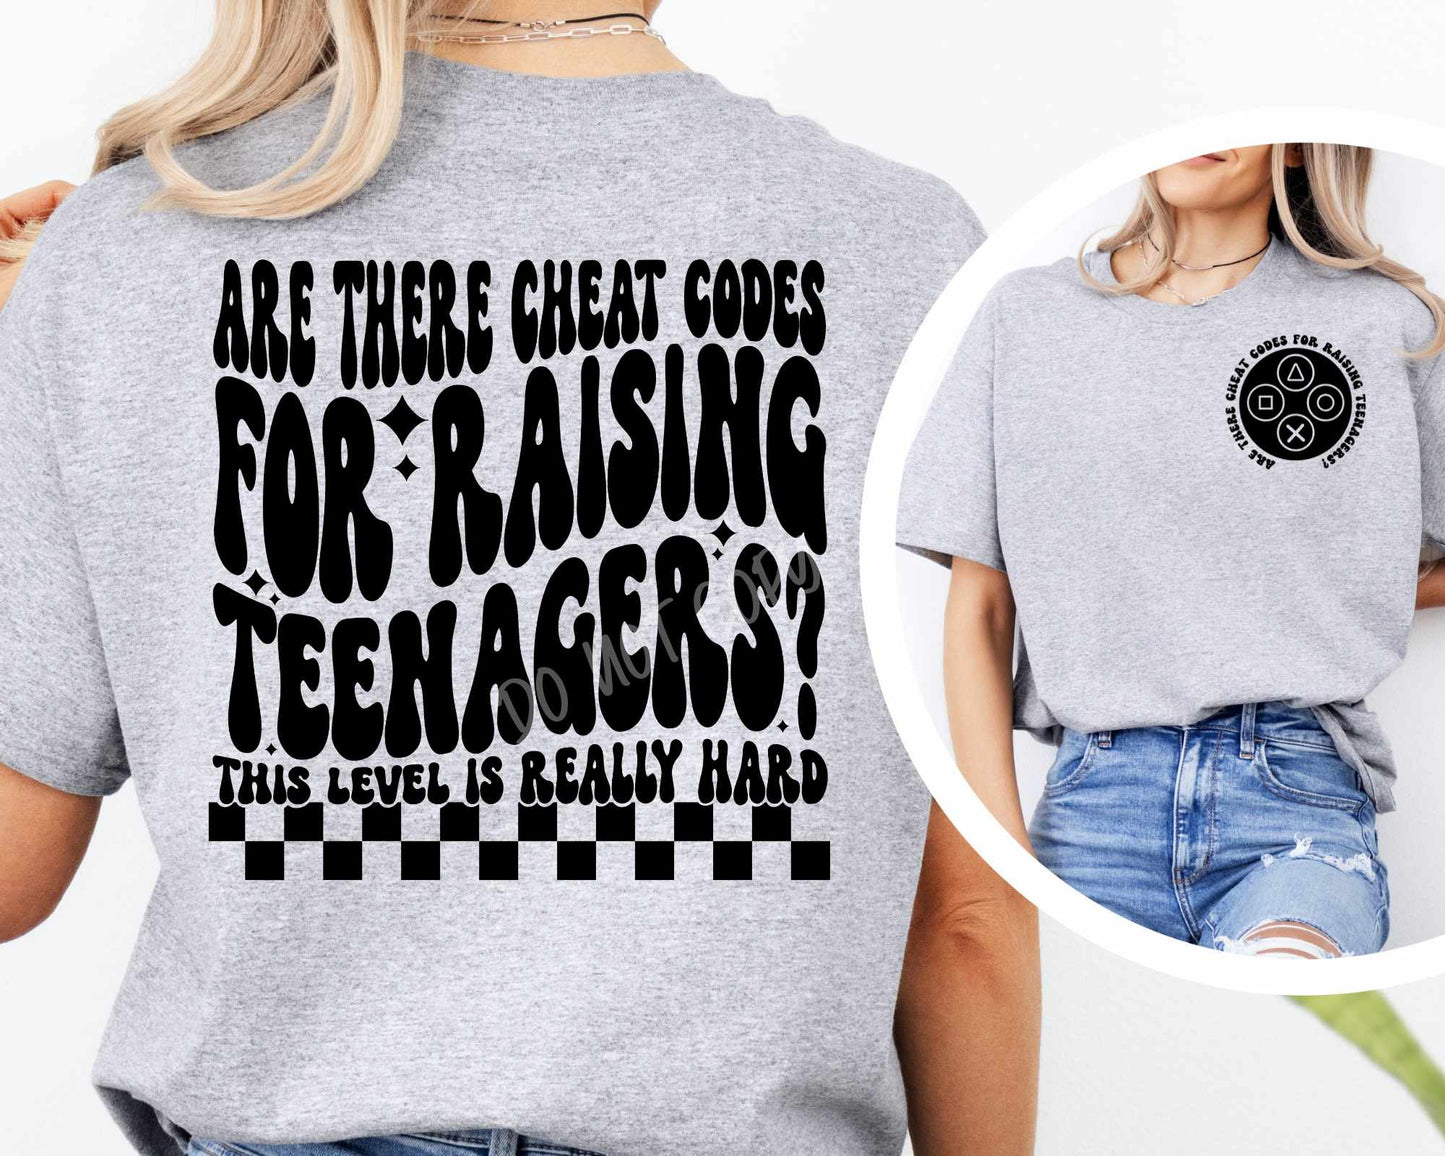 Are There Cheat Codes For Raising Teenagers? - Tee